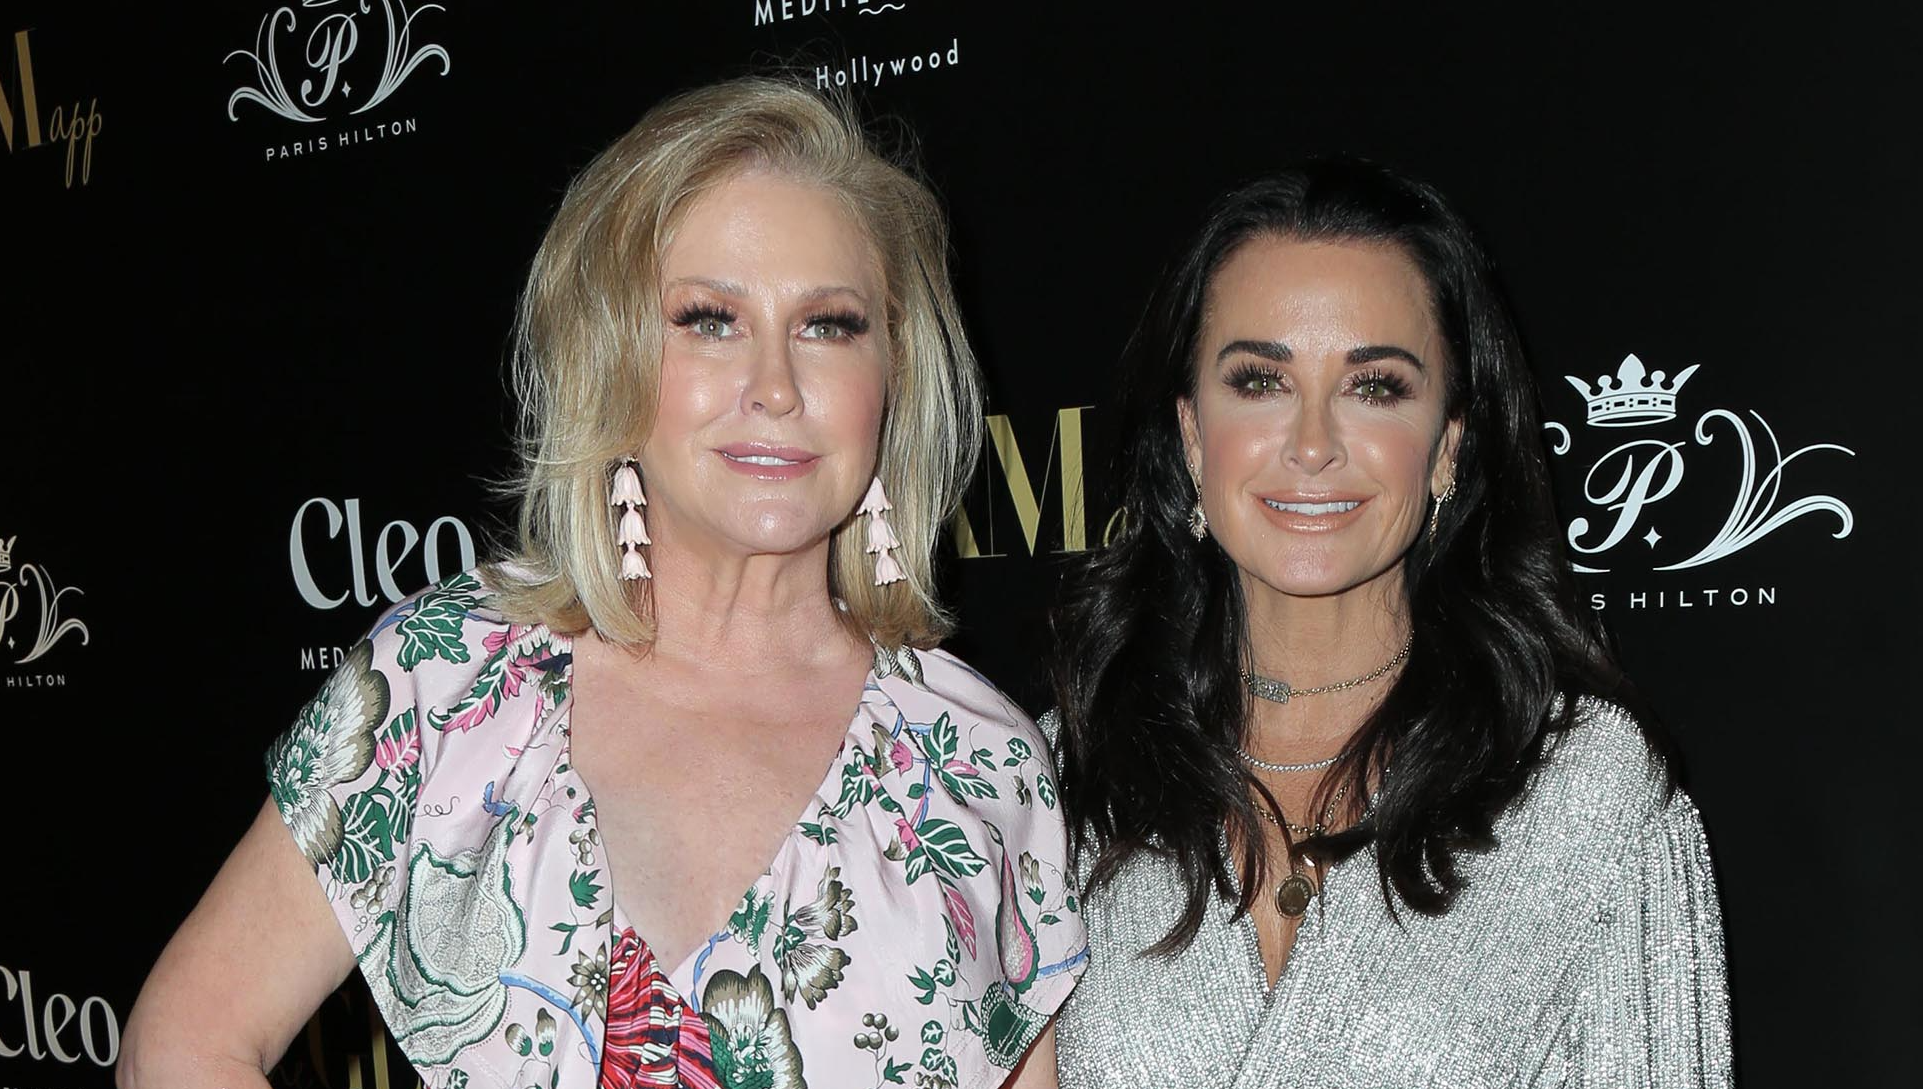 ‘RHOBH’ Fans Shun Kathy Hilton After Officially Joining Cast